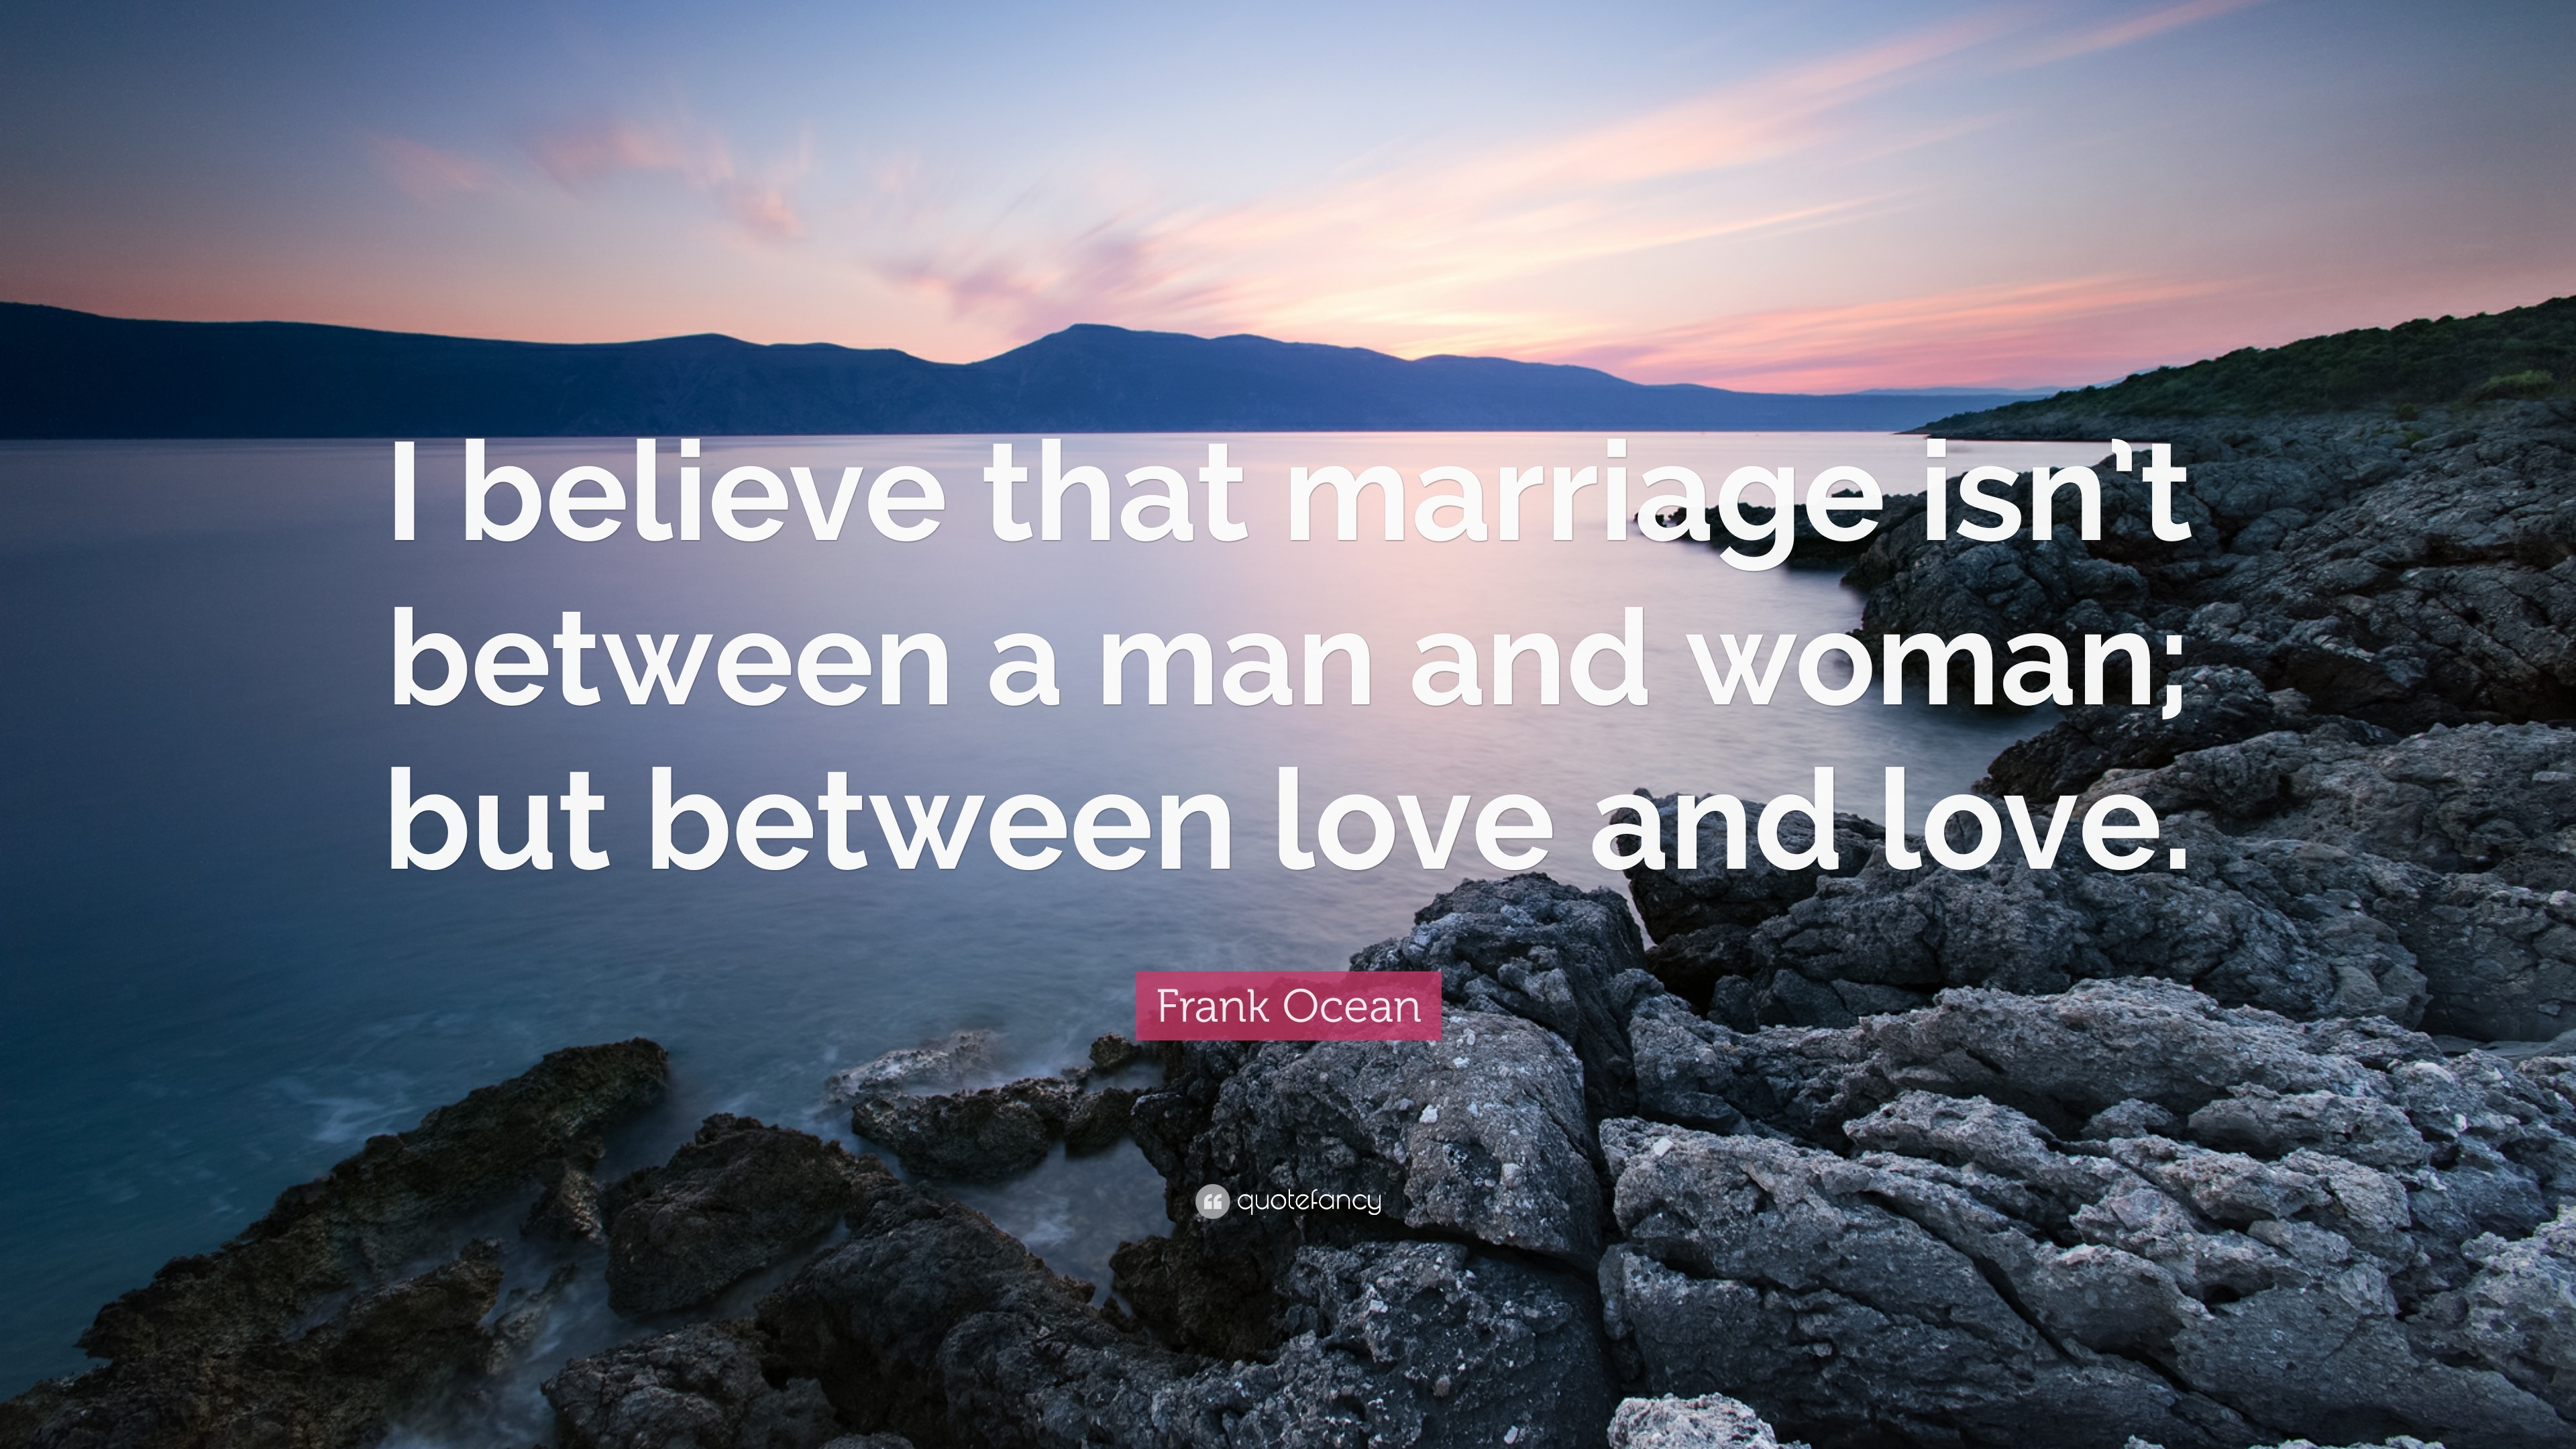 3840x2160 Frank Ocean Quote: “I believe that marriage isn't between a man and